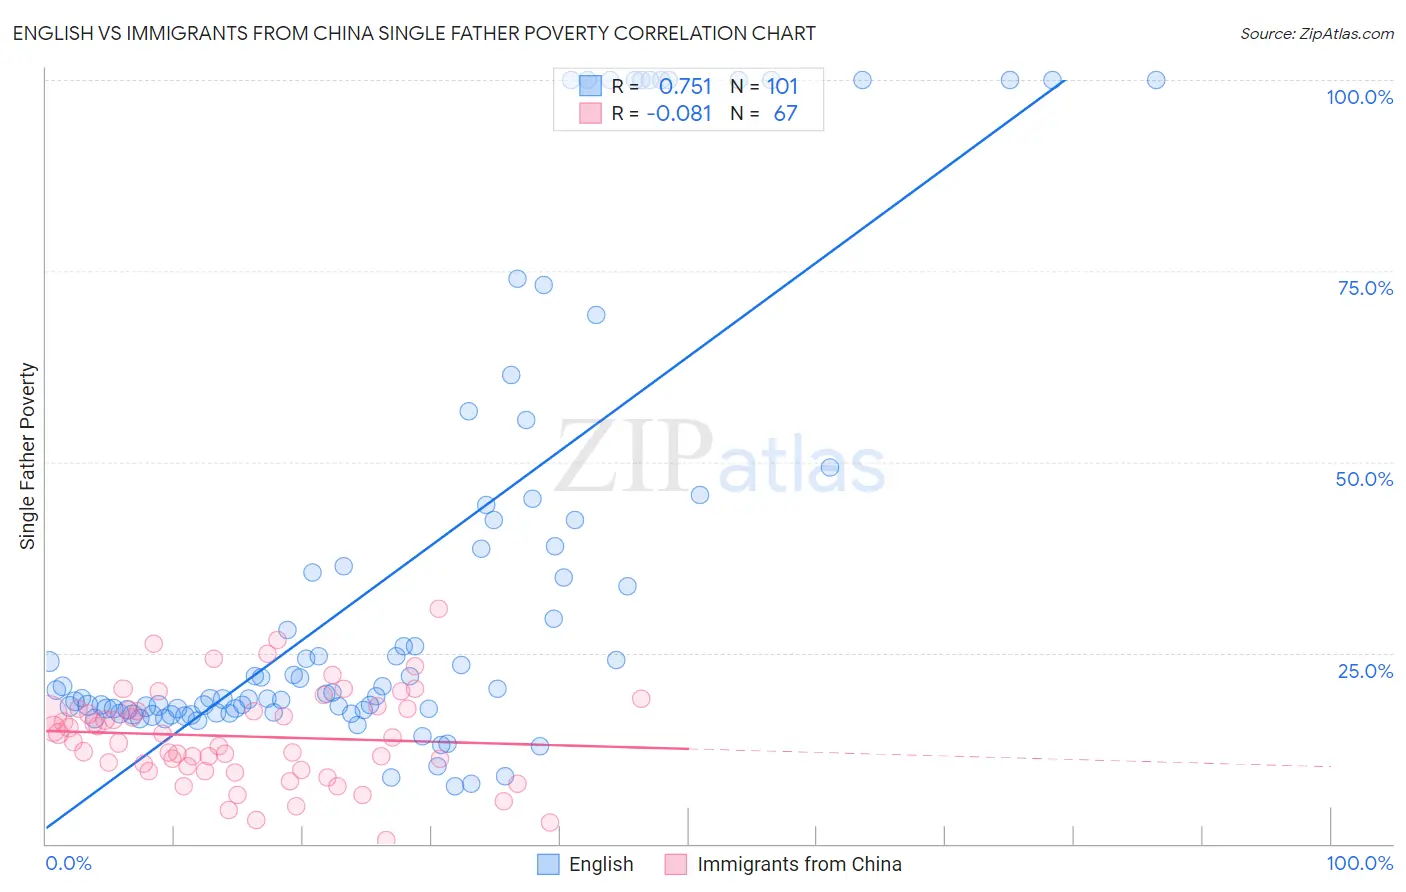 English vs Immigrants from China Single Father Poverty